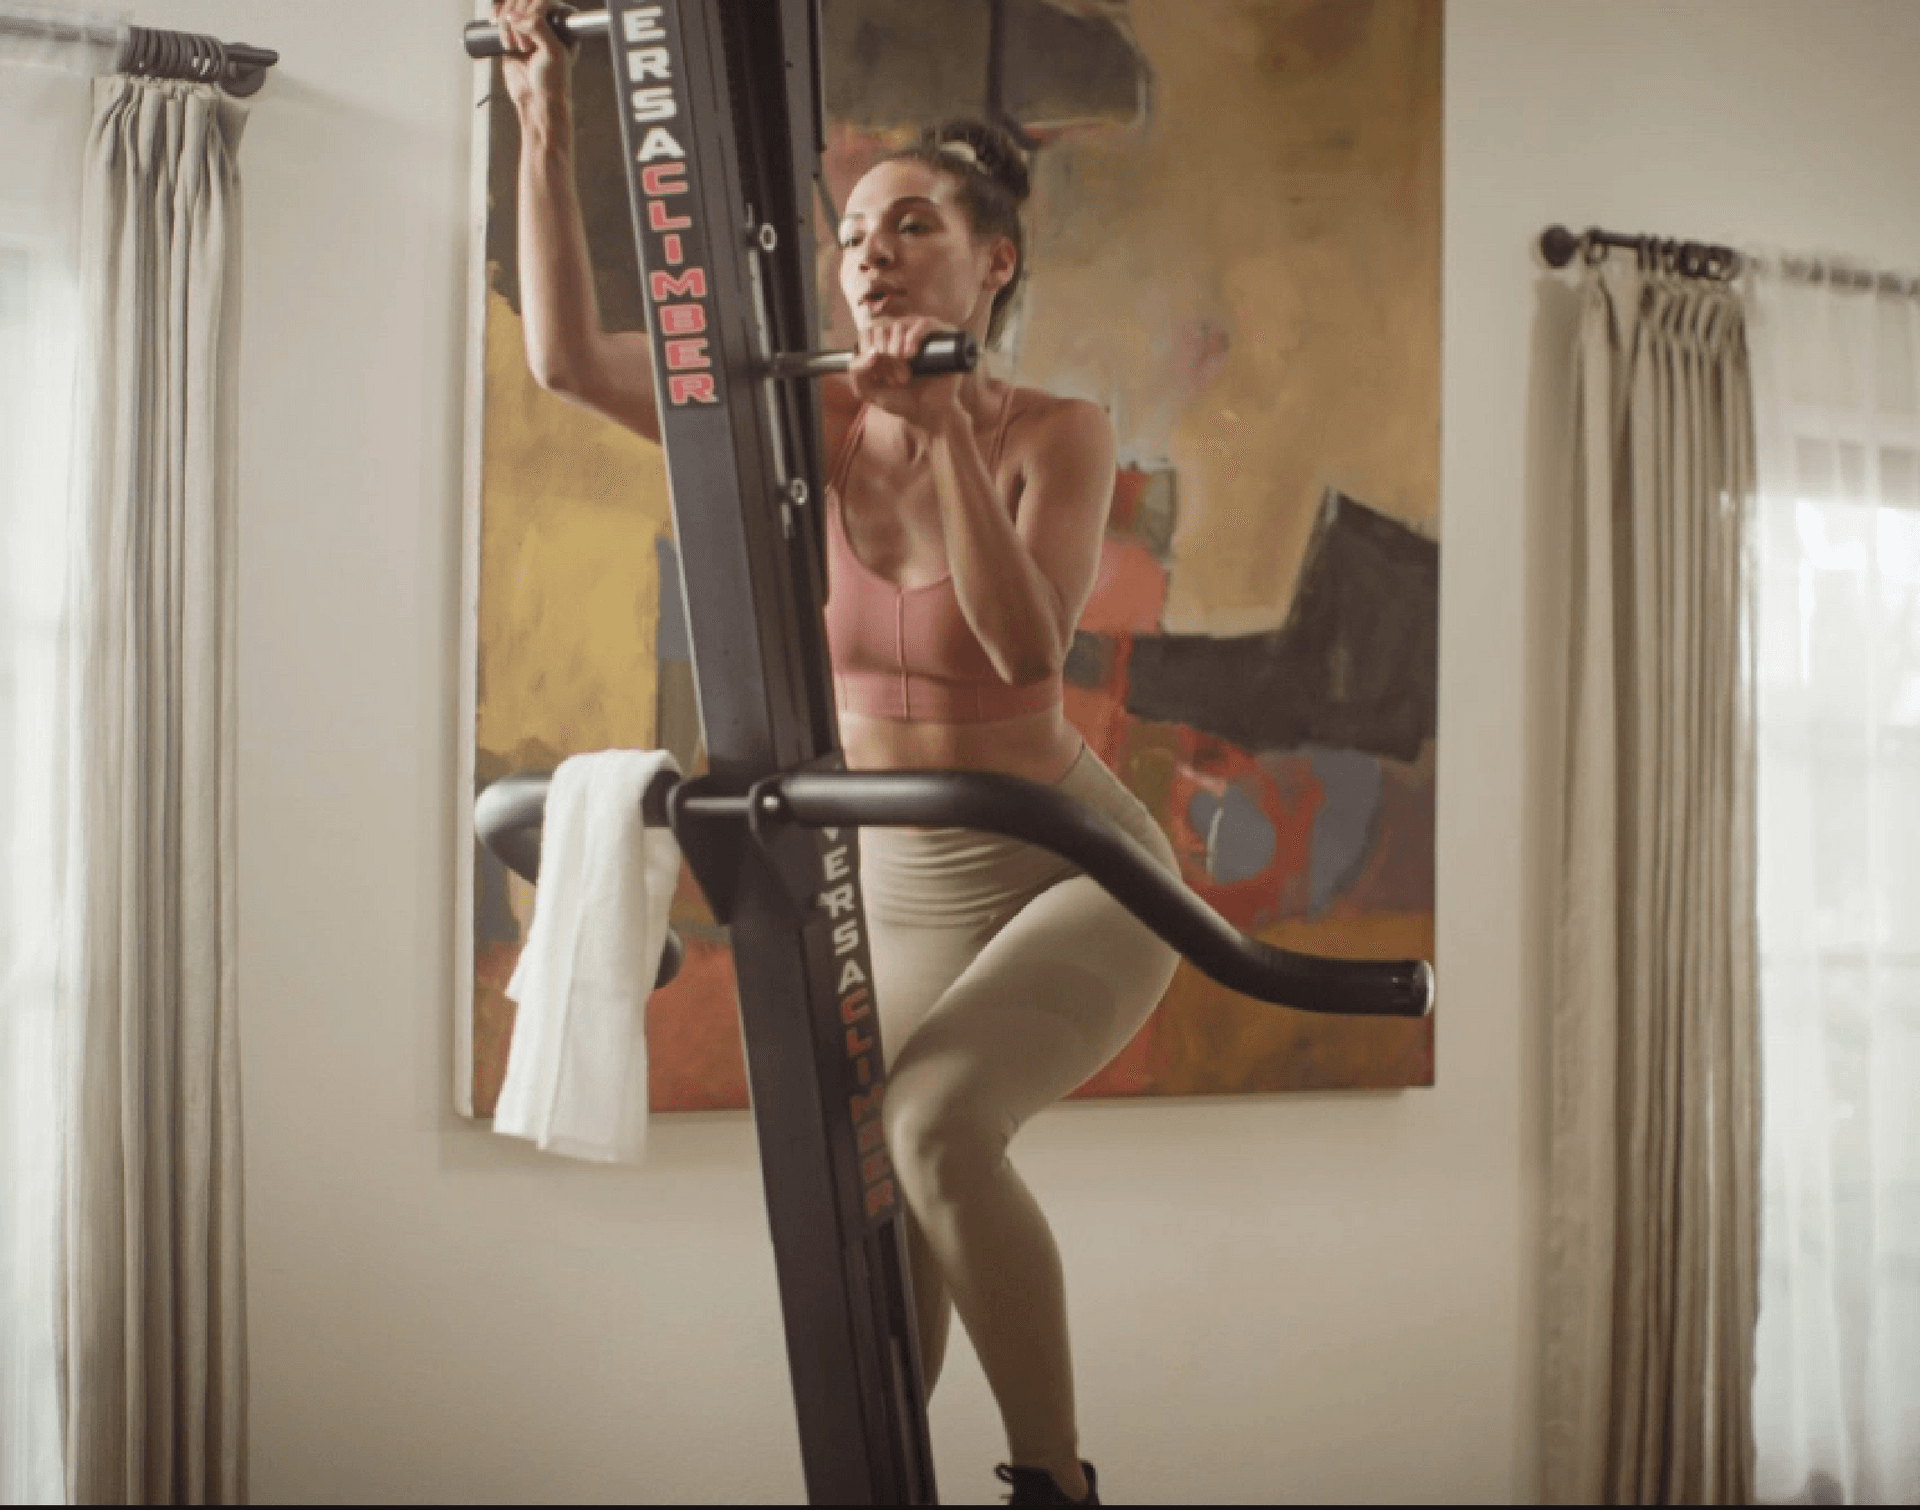 <p>Get <strong>Finance flexible</strong> with your new Versaclimber</p>
